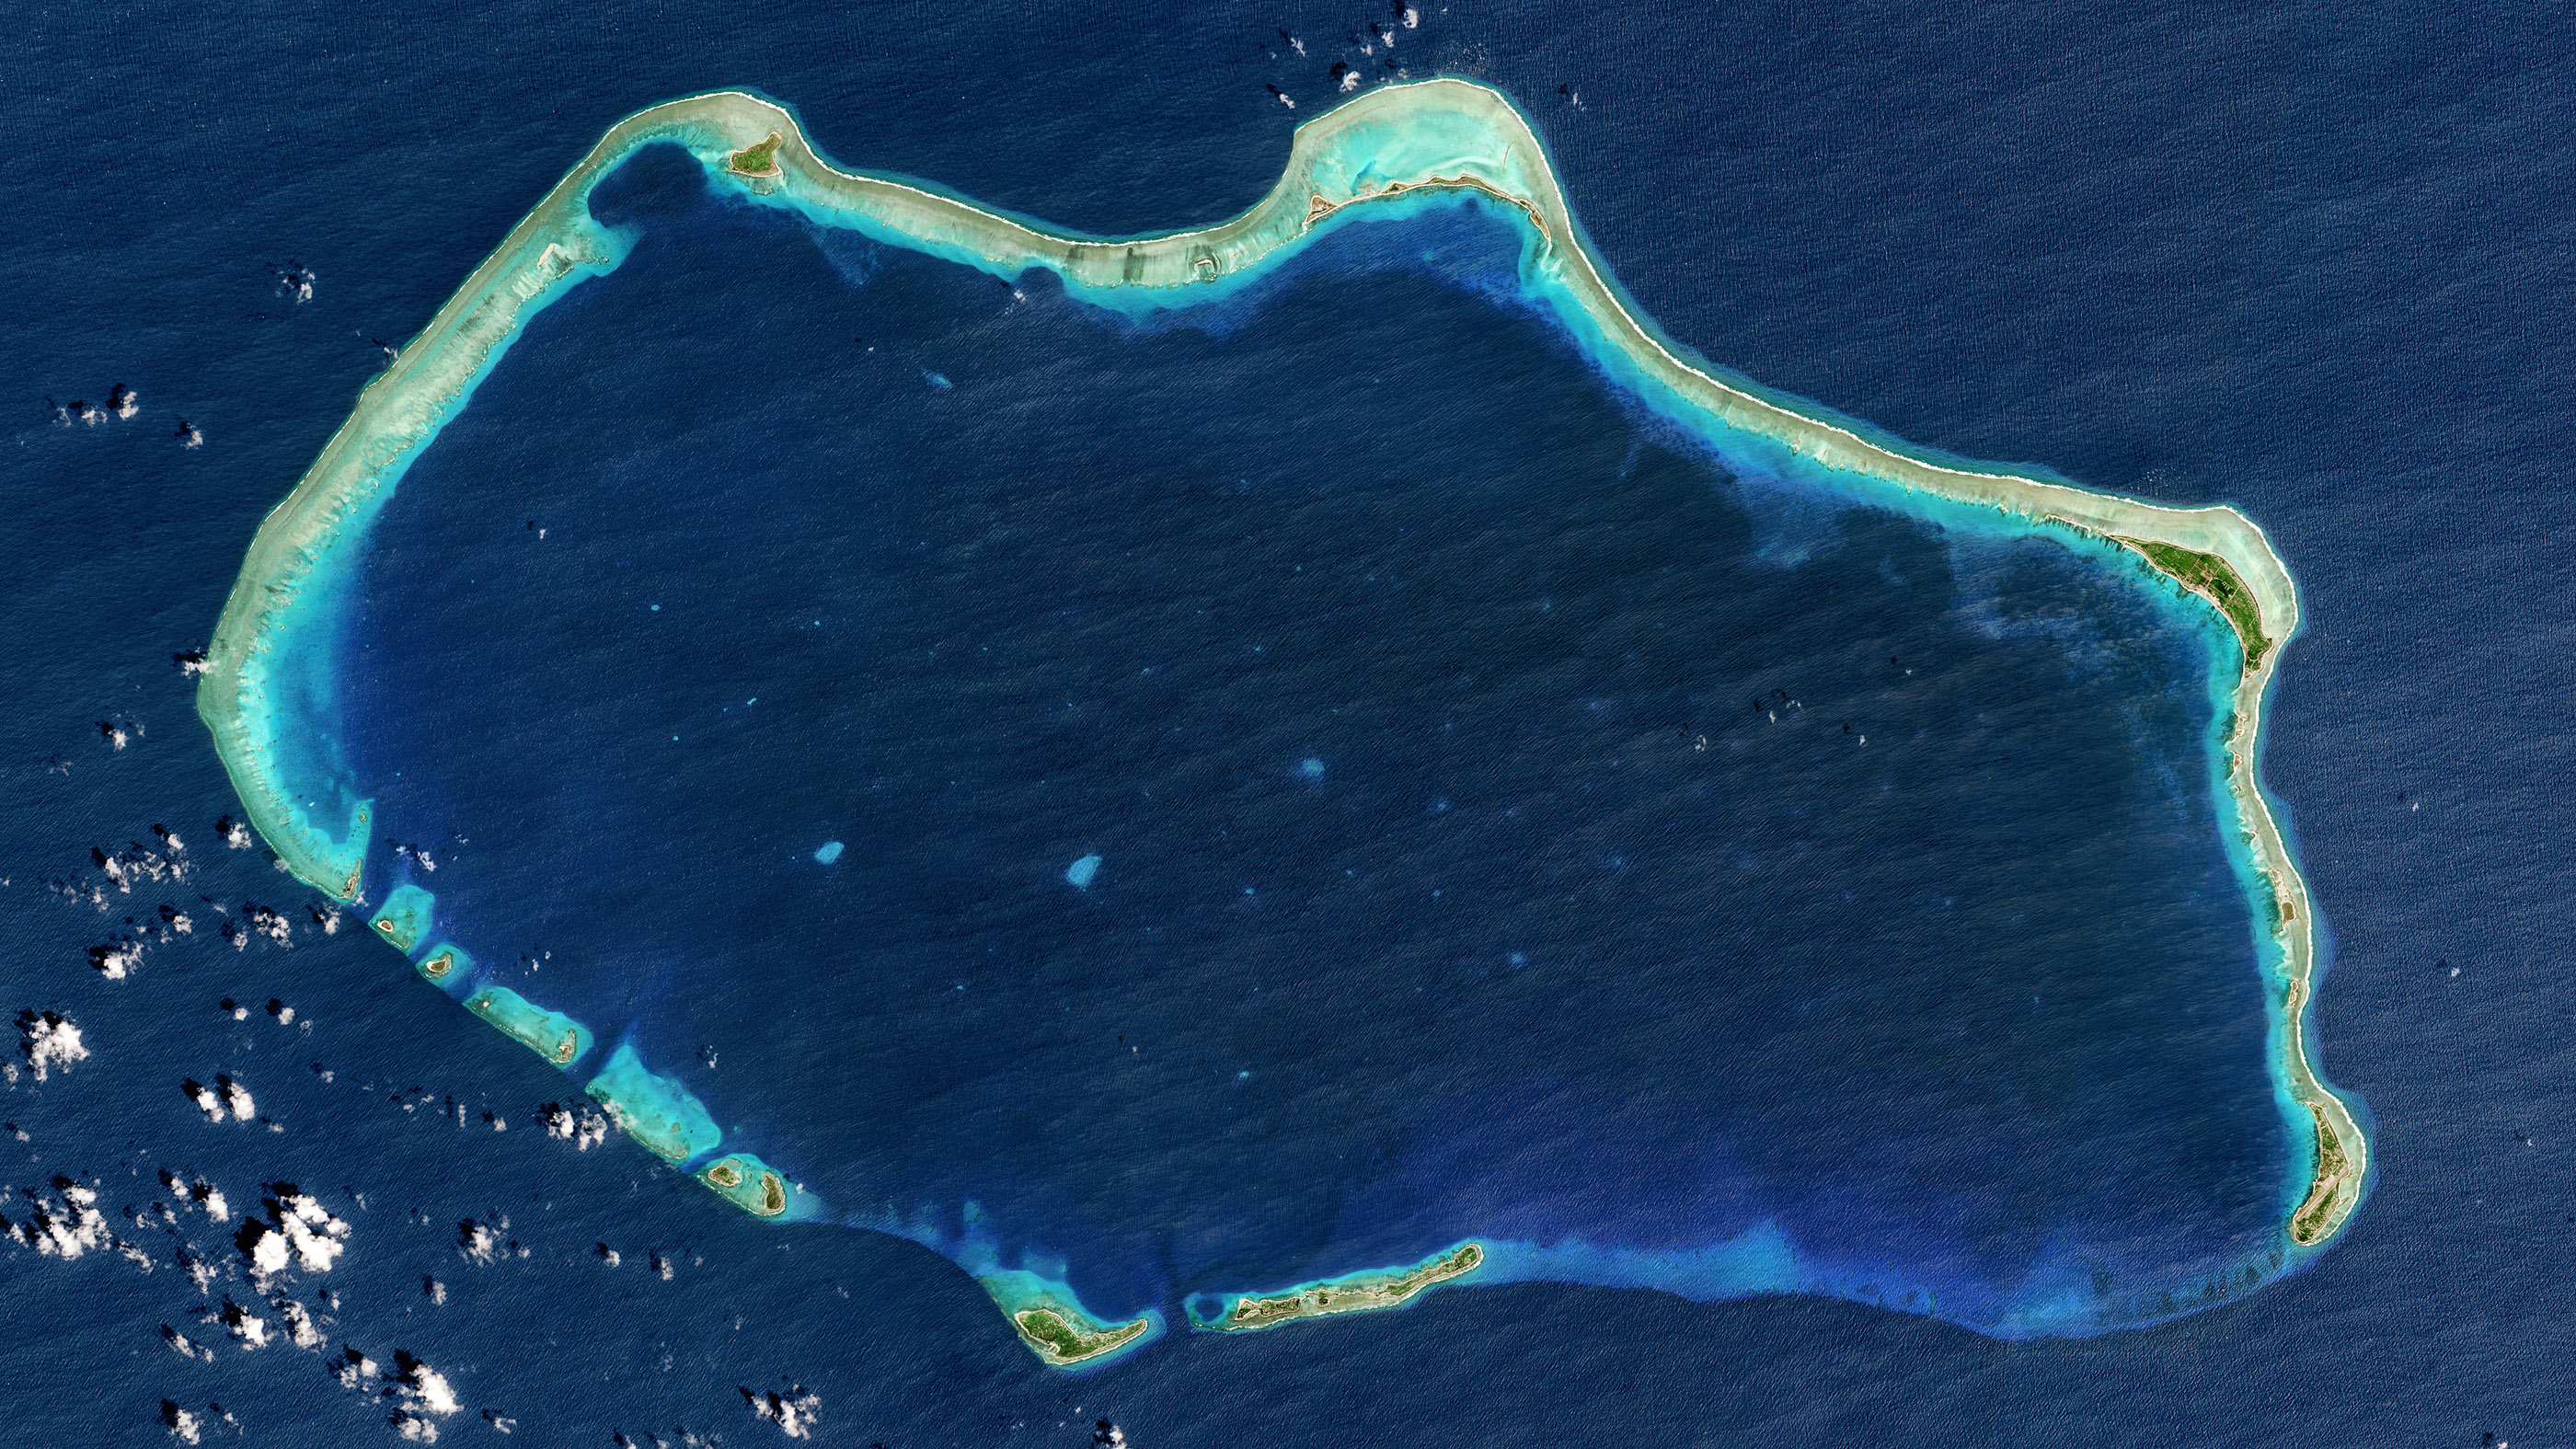 This satellite image shows Bikini Atoll, part of the Marshall Islands in the Pacific Ocean, on March 09, 2017.